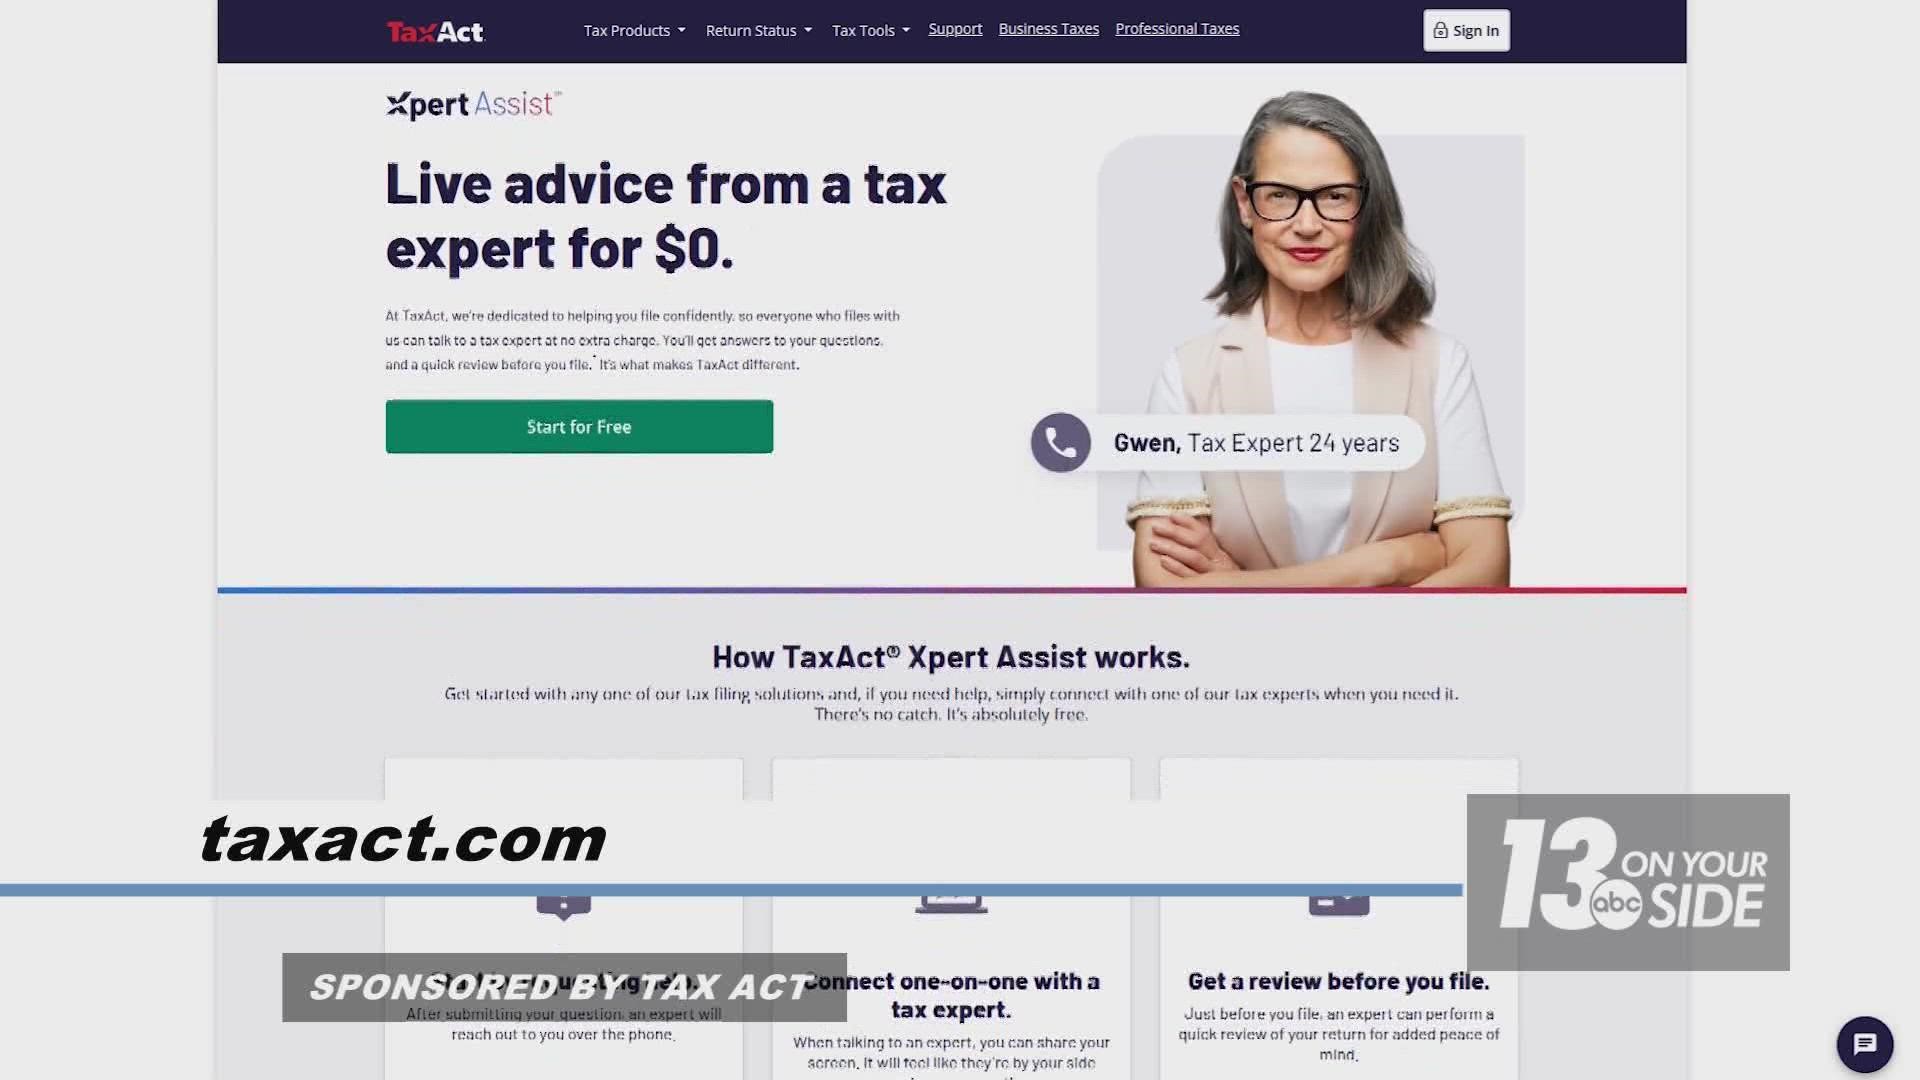 TaxAct seeks to make filing your own taxes a breeze